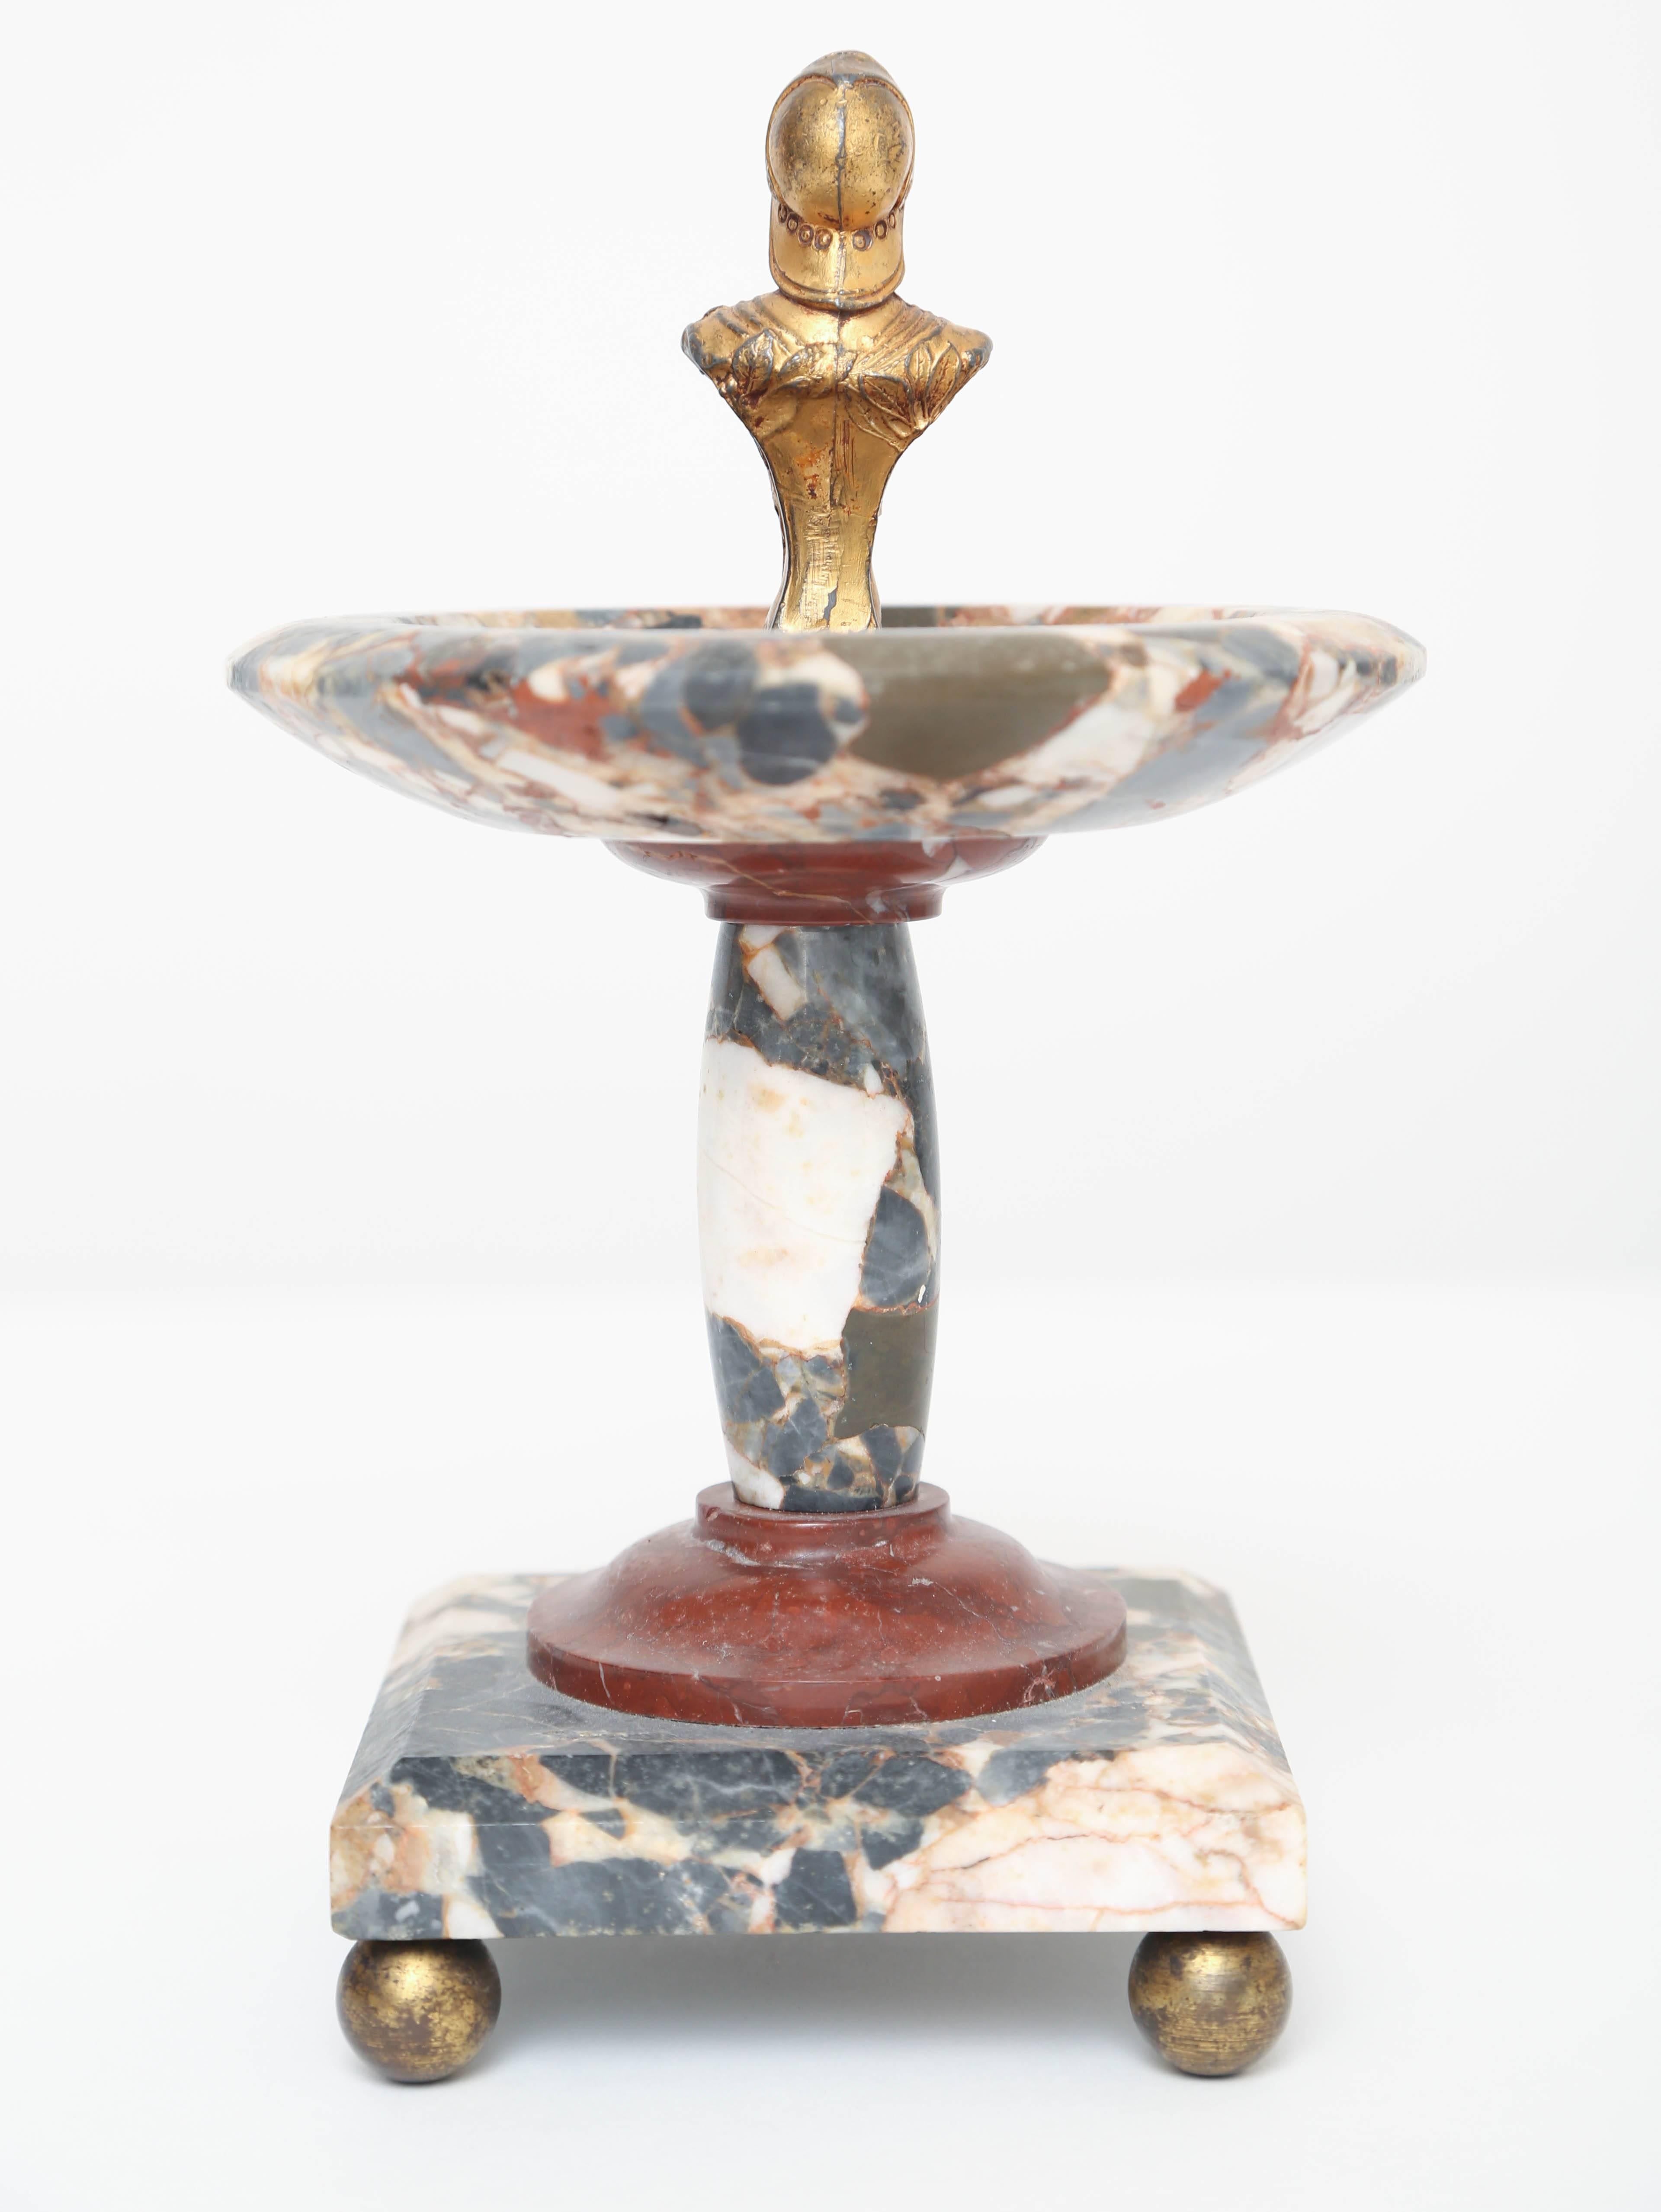 Bronze Marble Tazza with bust of Joan of Arc, French, 19th c.